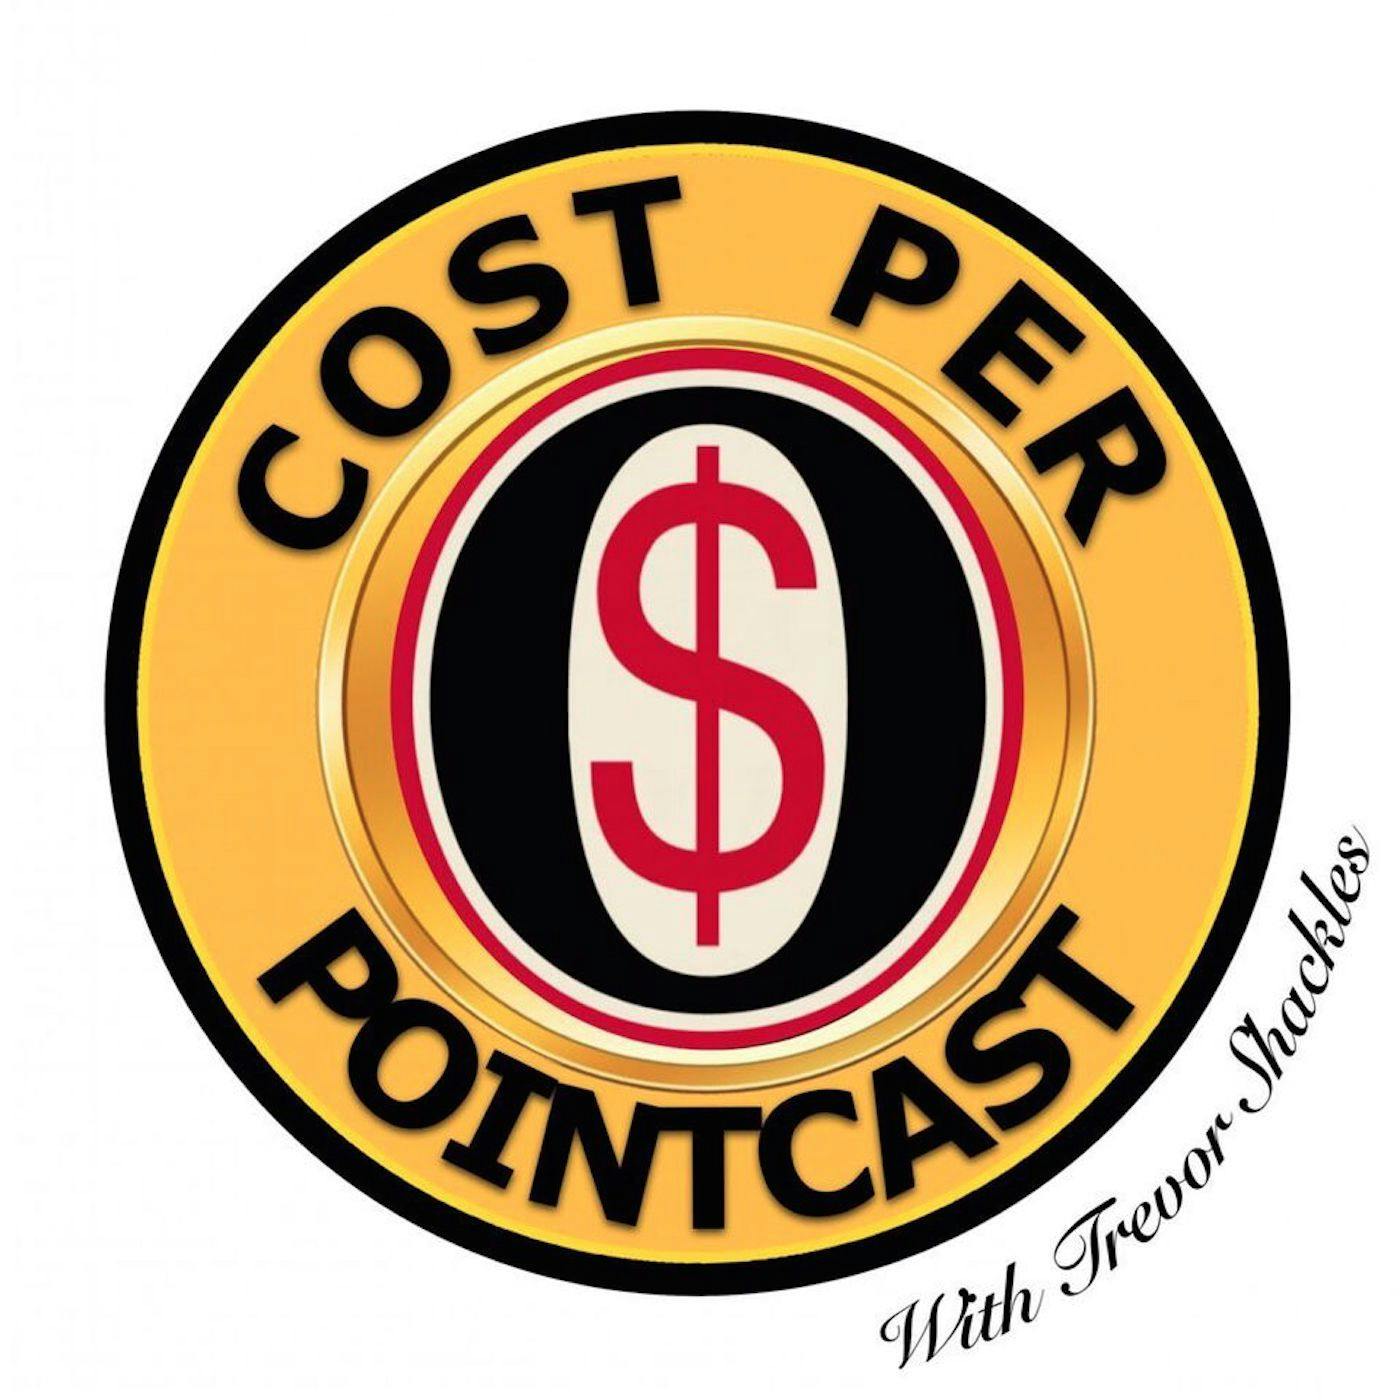 Cost Per Pointcast, Ep. 30: Iconic Tychonick and the Rest ft. Ary